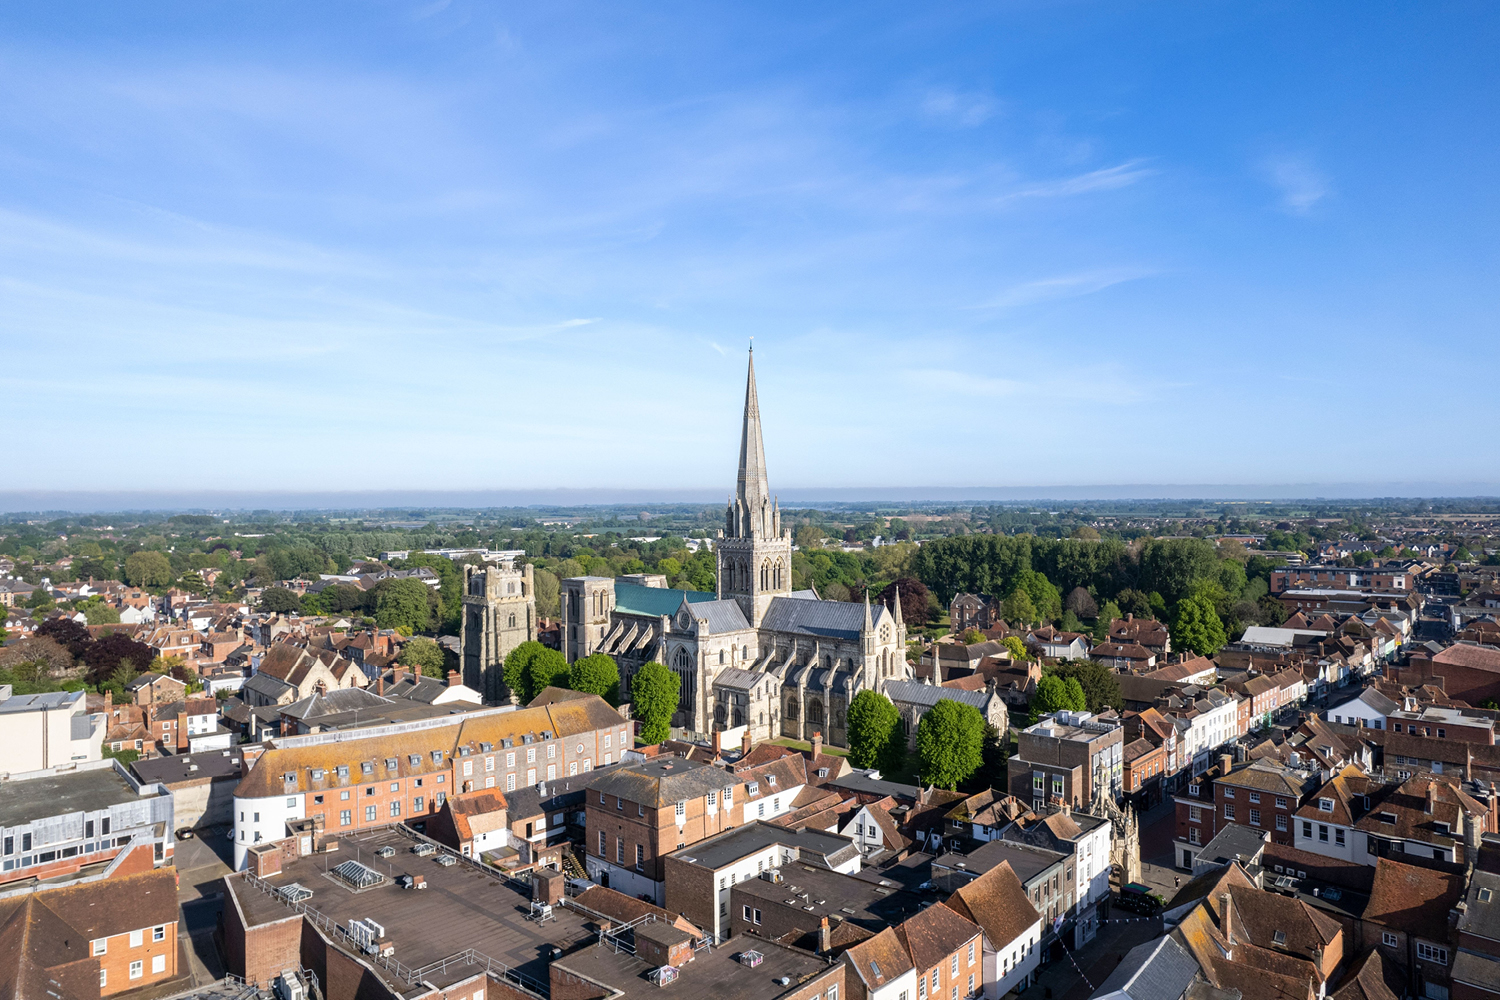 Ariel view over Chichester